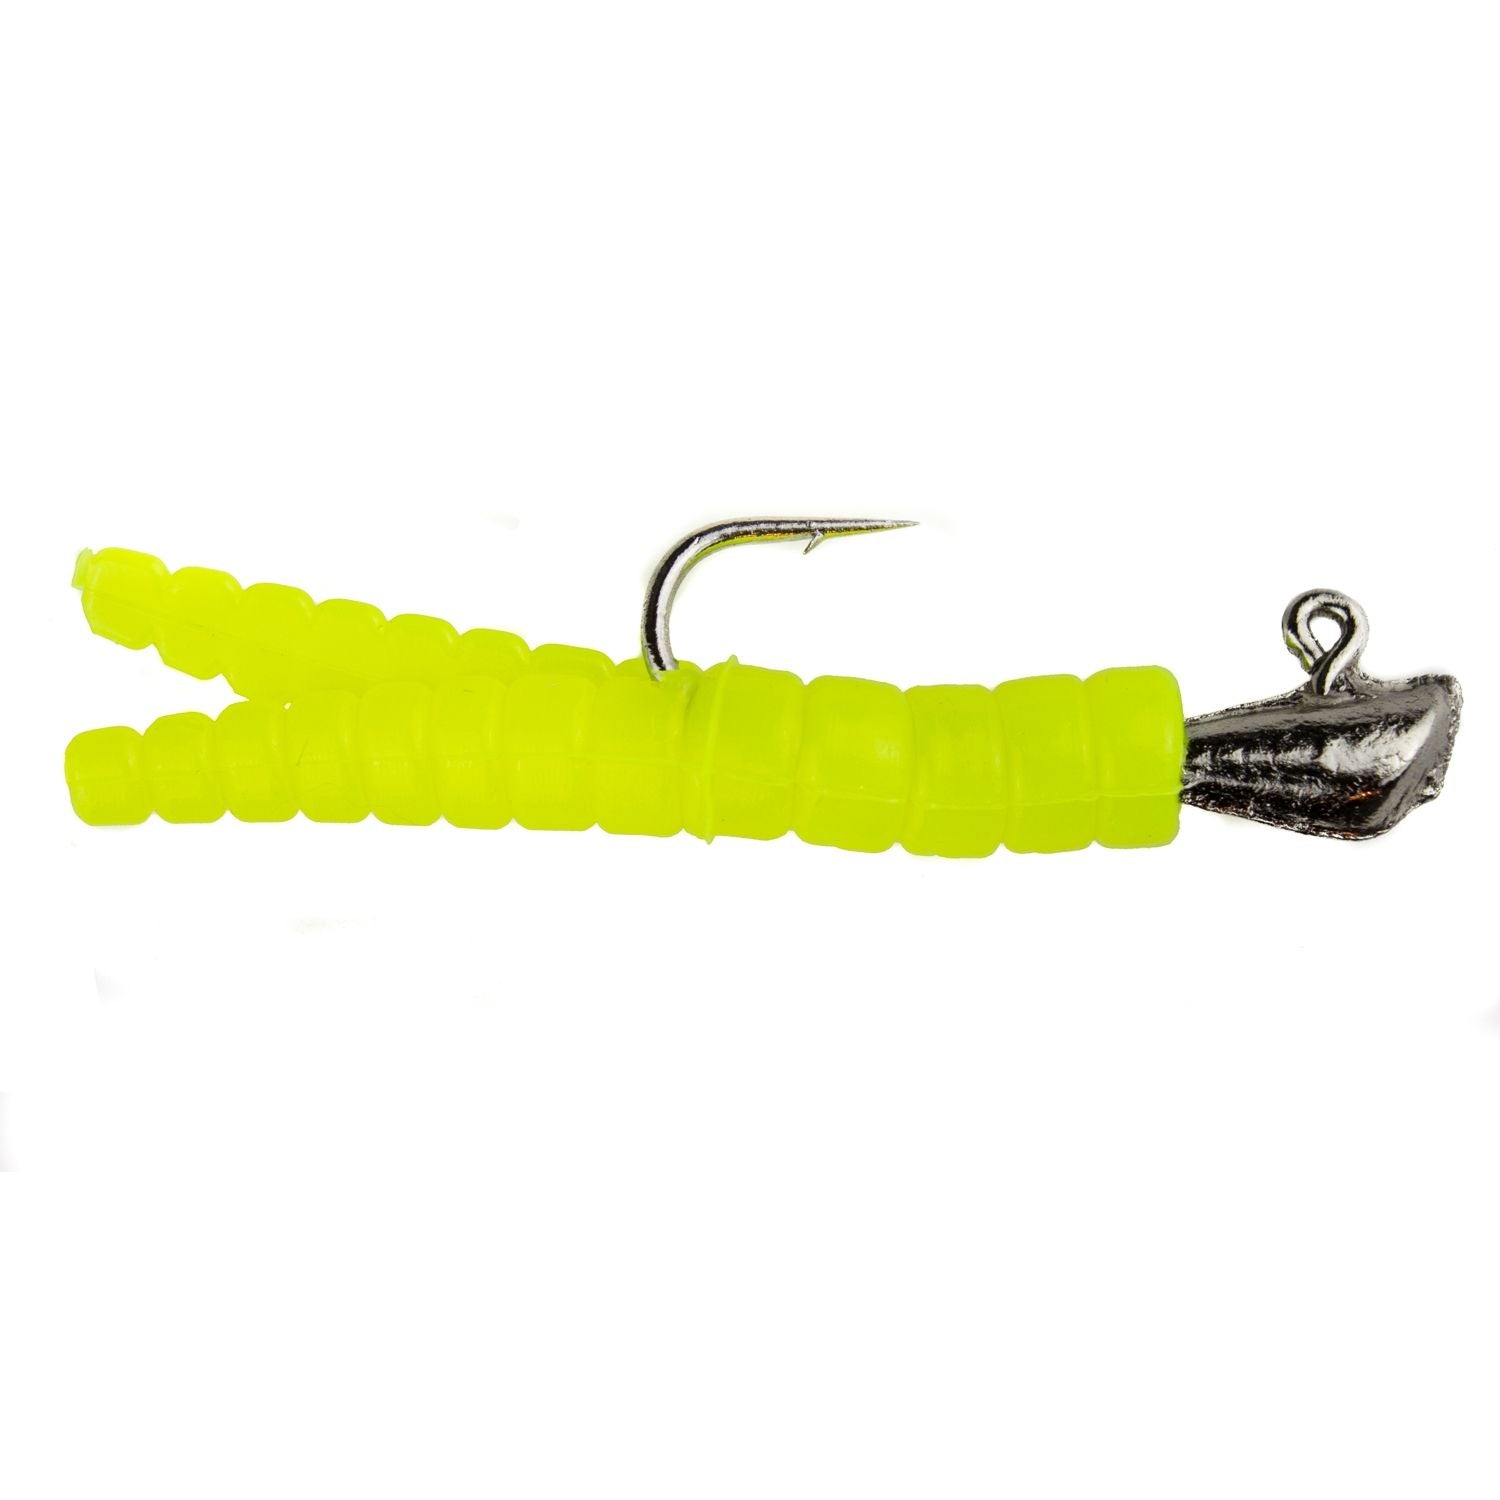 Hookup 94-02 Light Tackle Jighead 1/32 oz Chartreuse 5 Per Pack